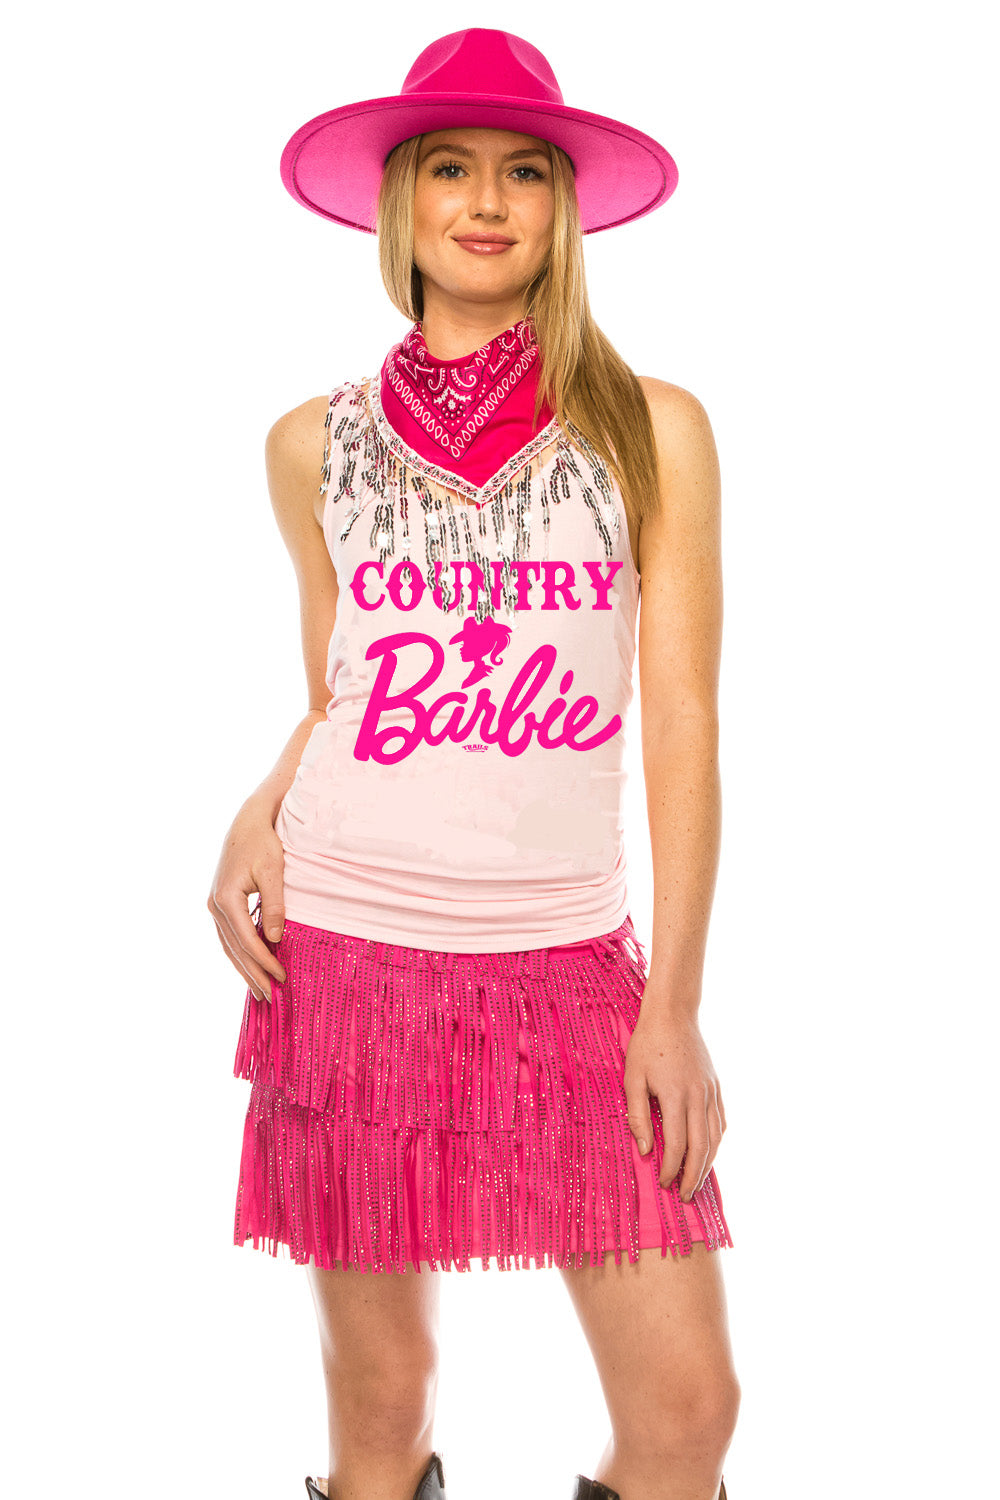 COUNTRY BARBIE TANK TOP